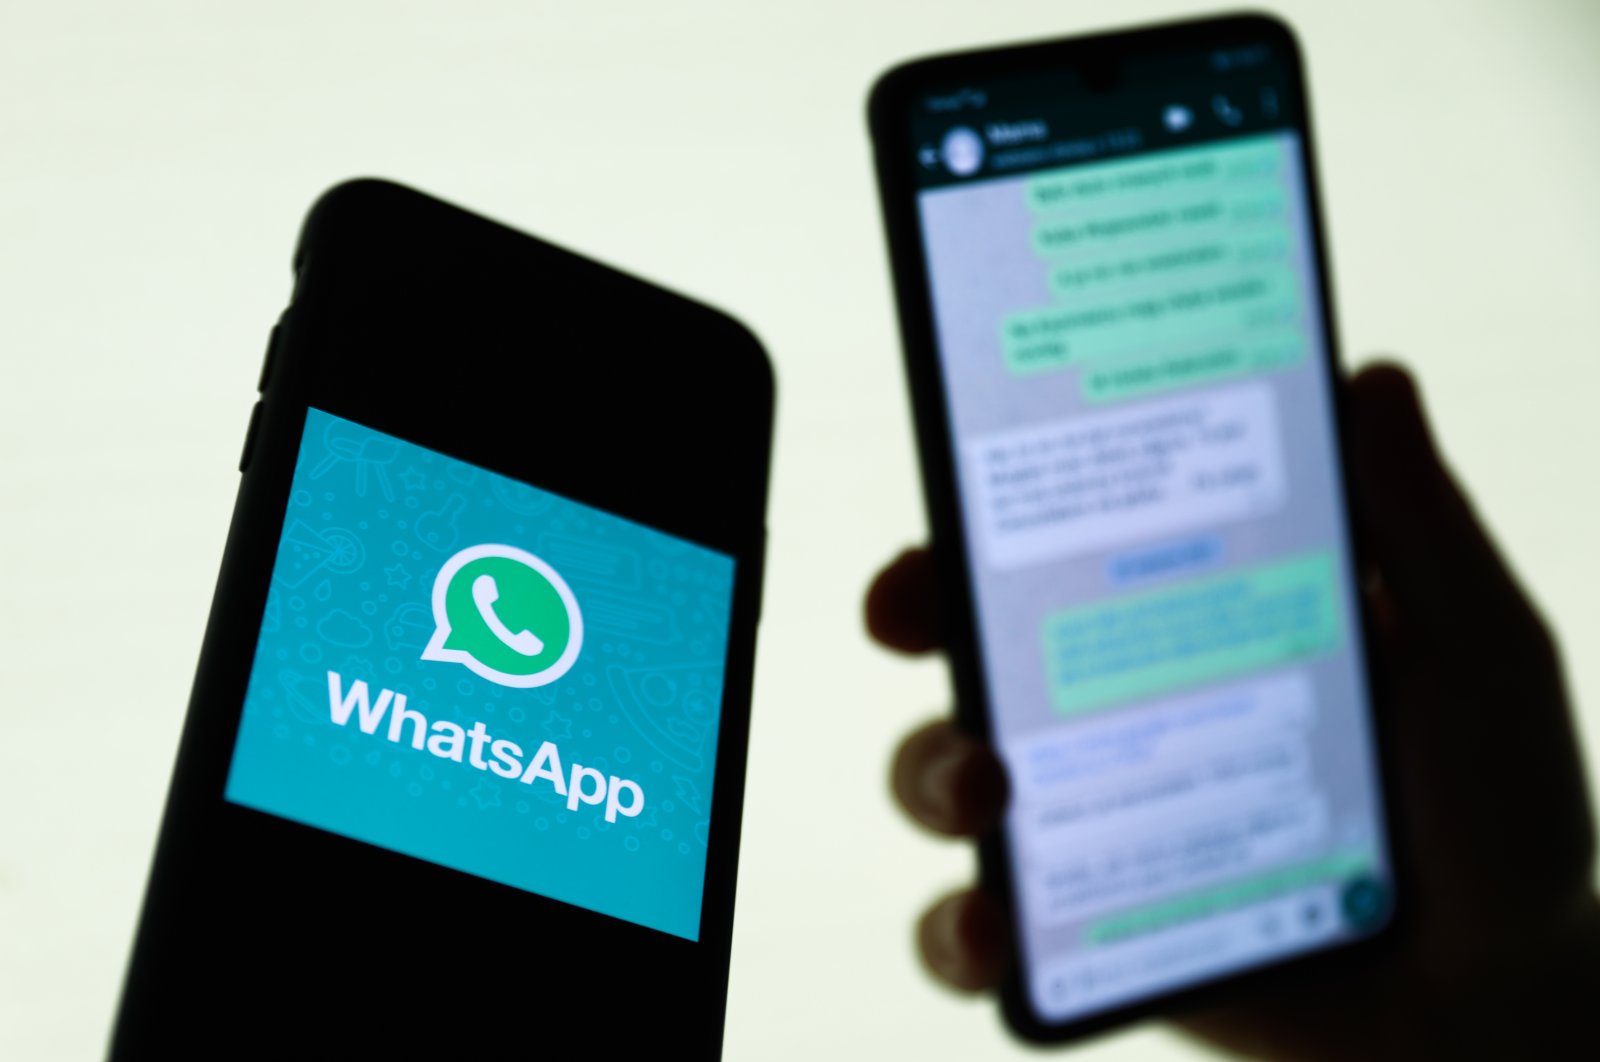 The WhatsApp logo is displayed on a phone screen and a conversation on WhatsApp is displayed on a phone screen in the background in this illustration photo taken in Krakow, Poland, Aug. 27, 2021. (Reuters File Photo)